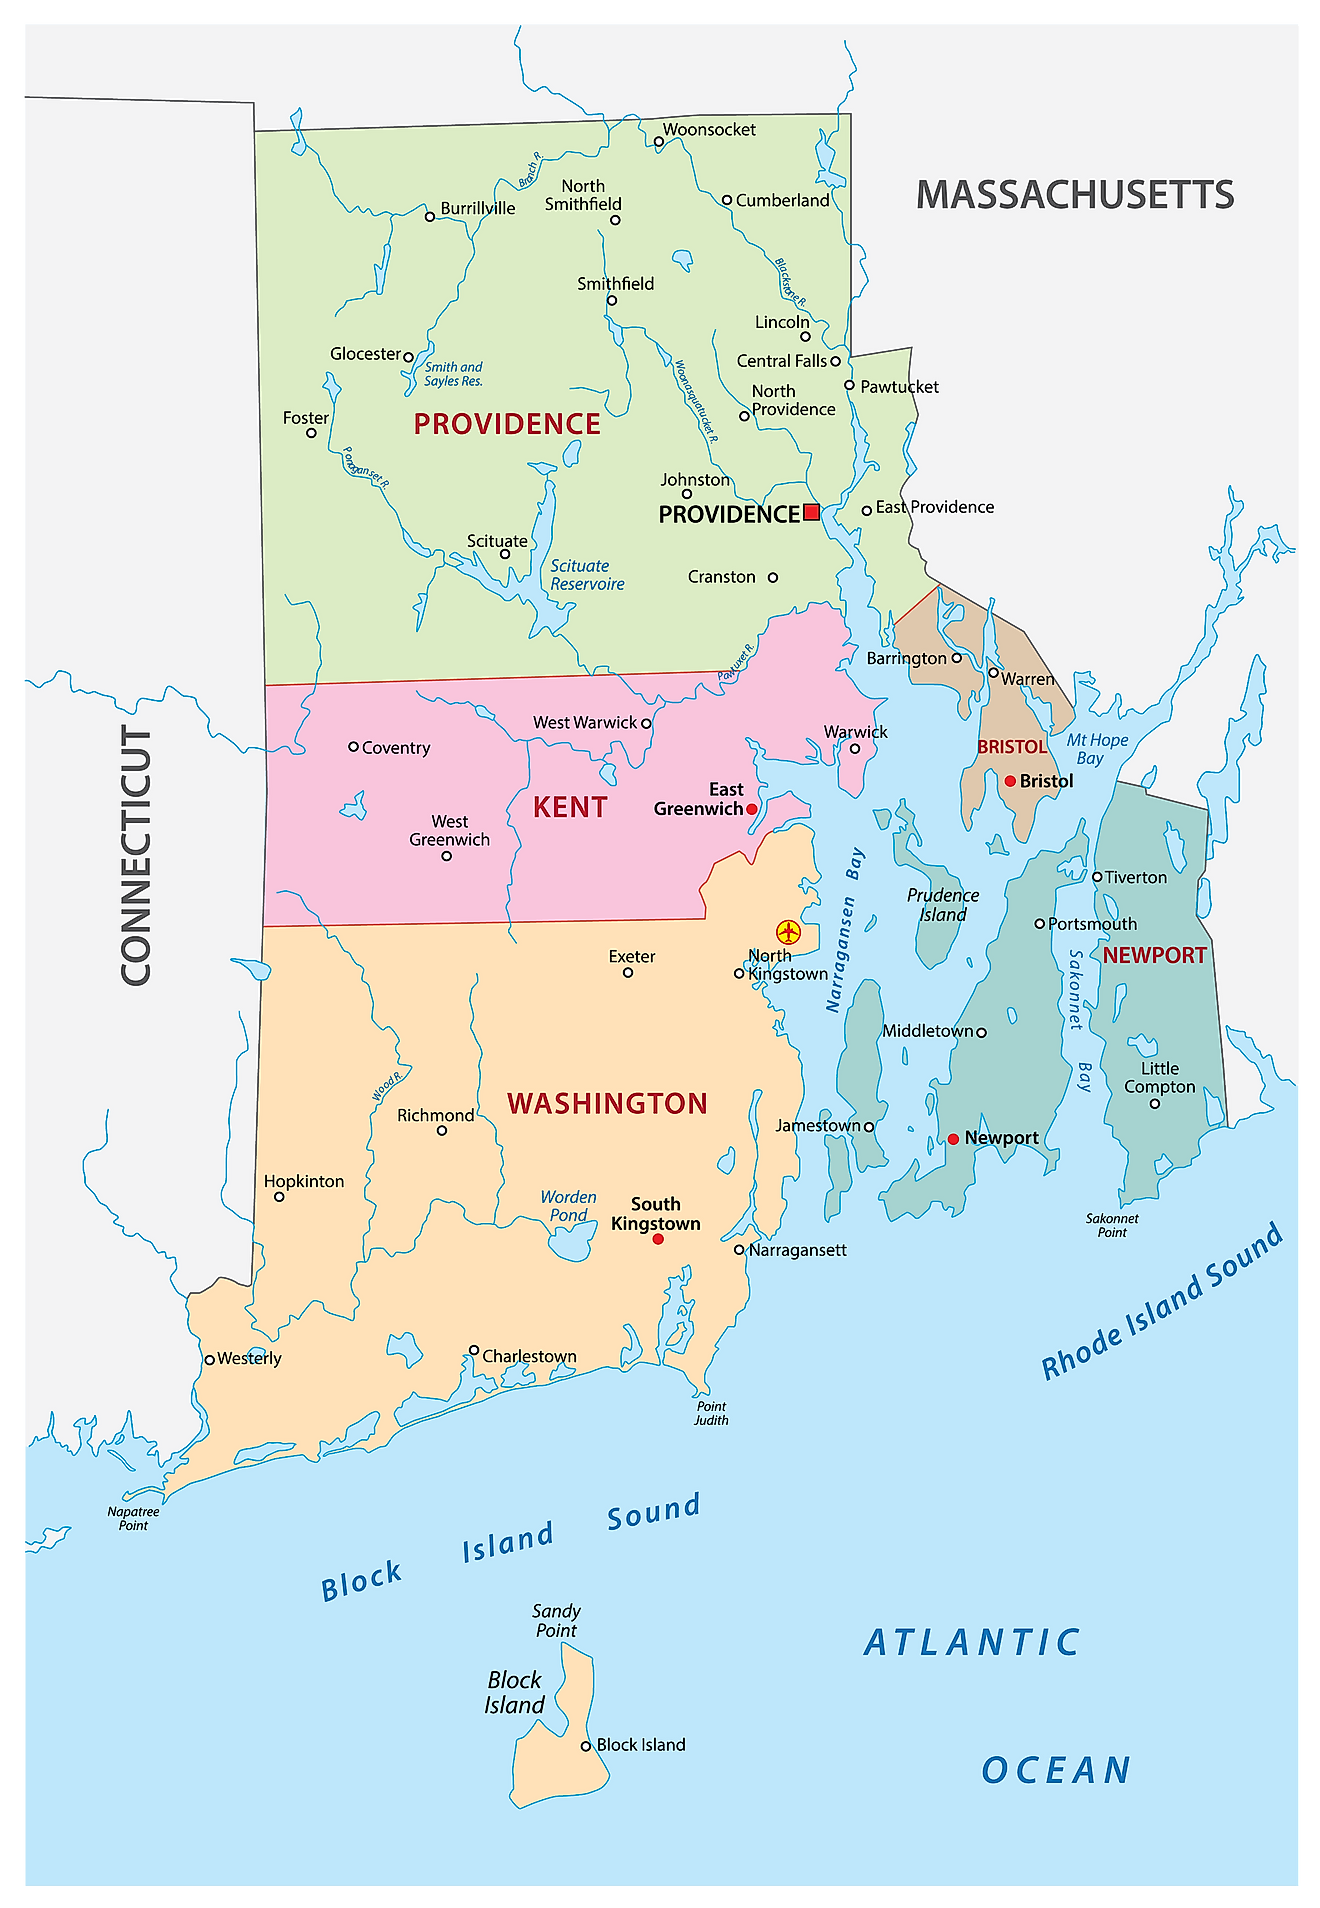 Administrative Map of Rhode Island showing its 5 counties and the capital city - Providence